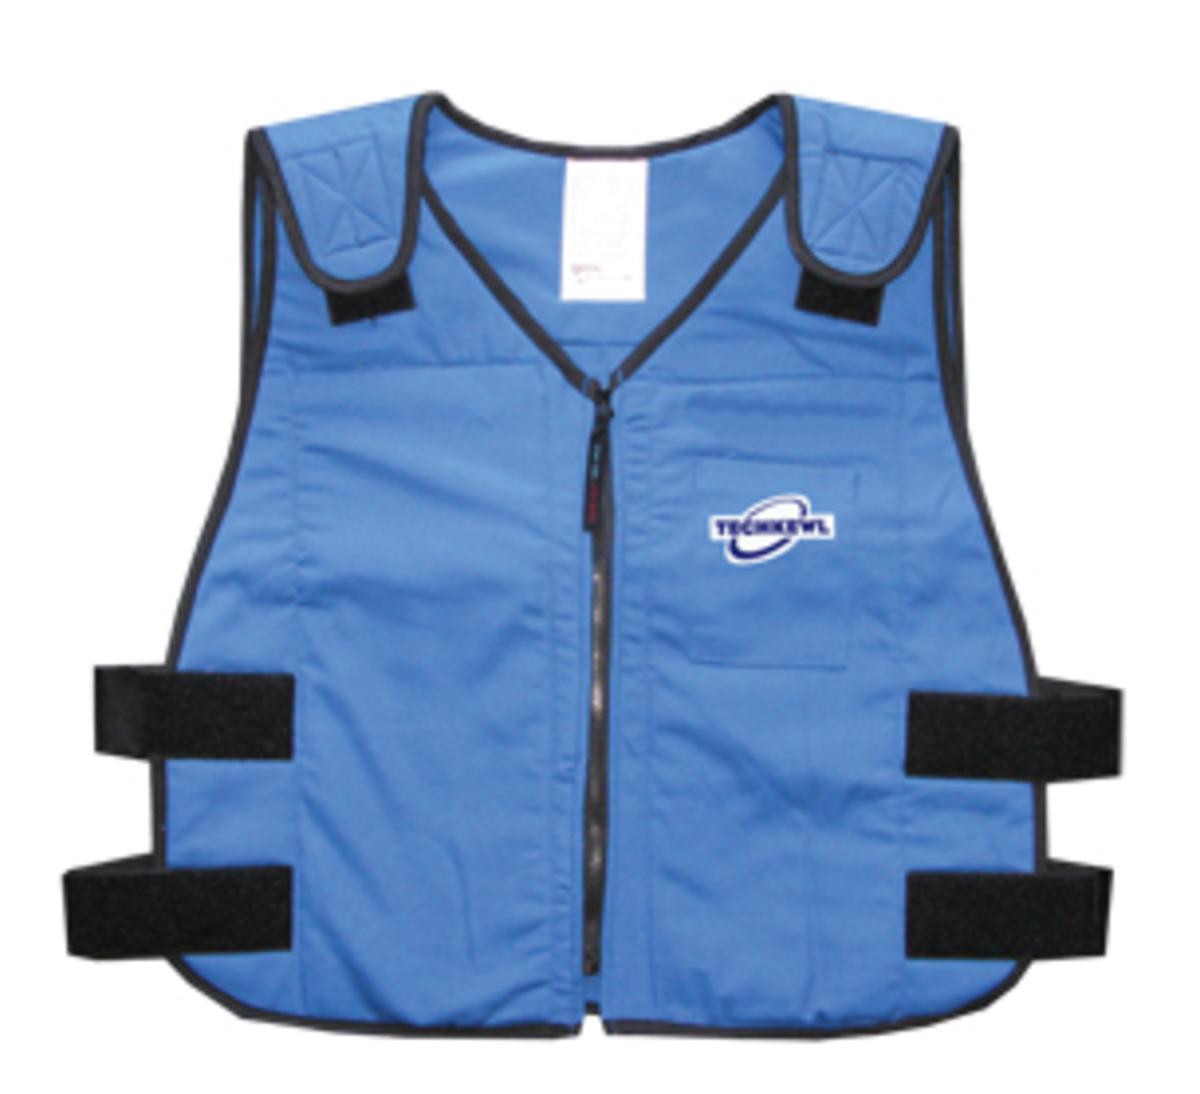 Techniche TechKewl 6626 Phase Change Cooling Vest with Inserts and Cooler - Blue